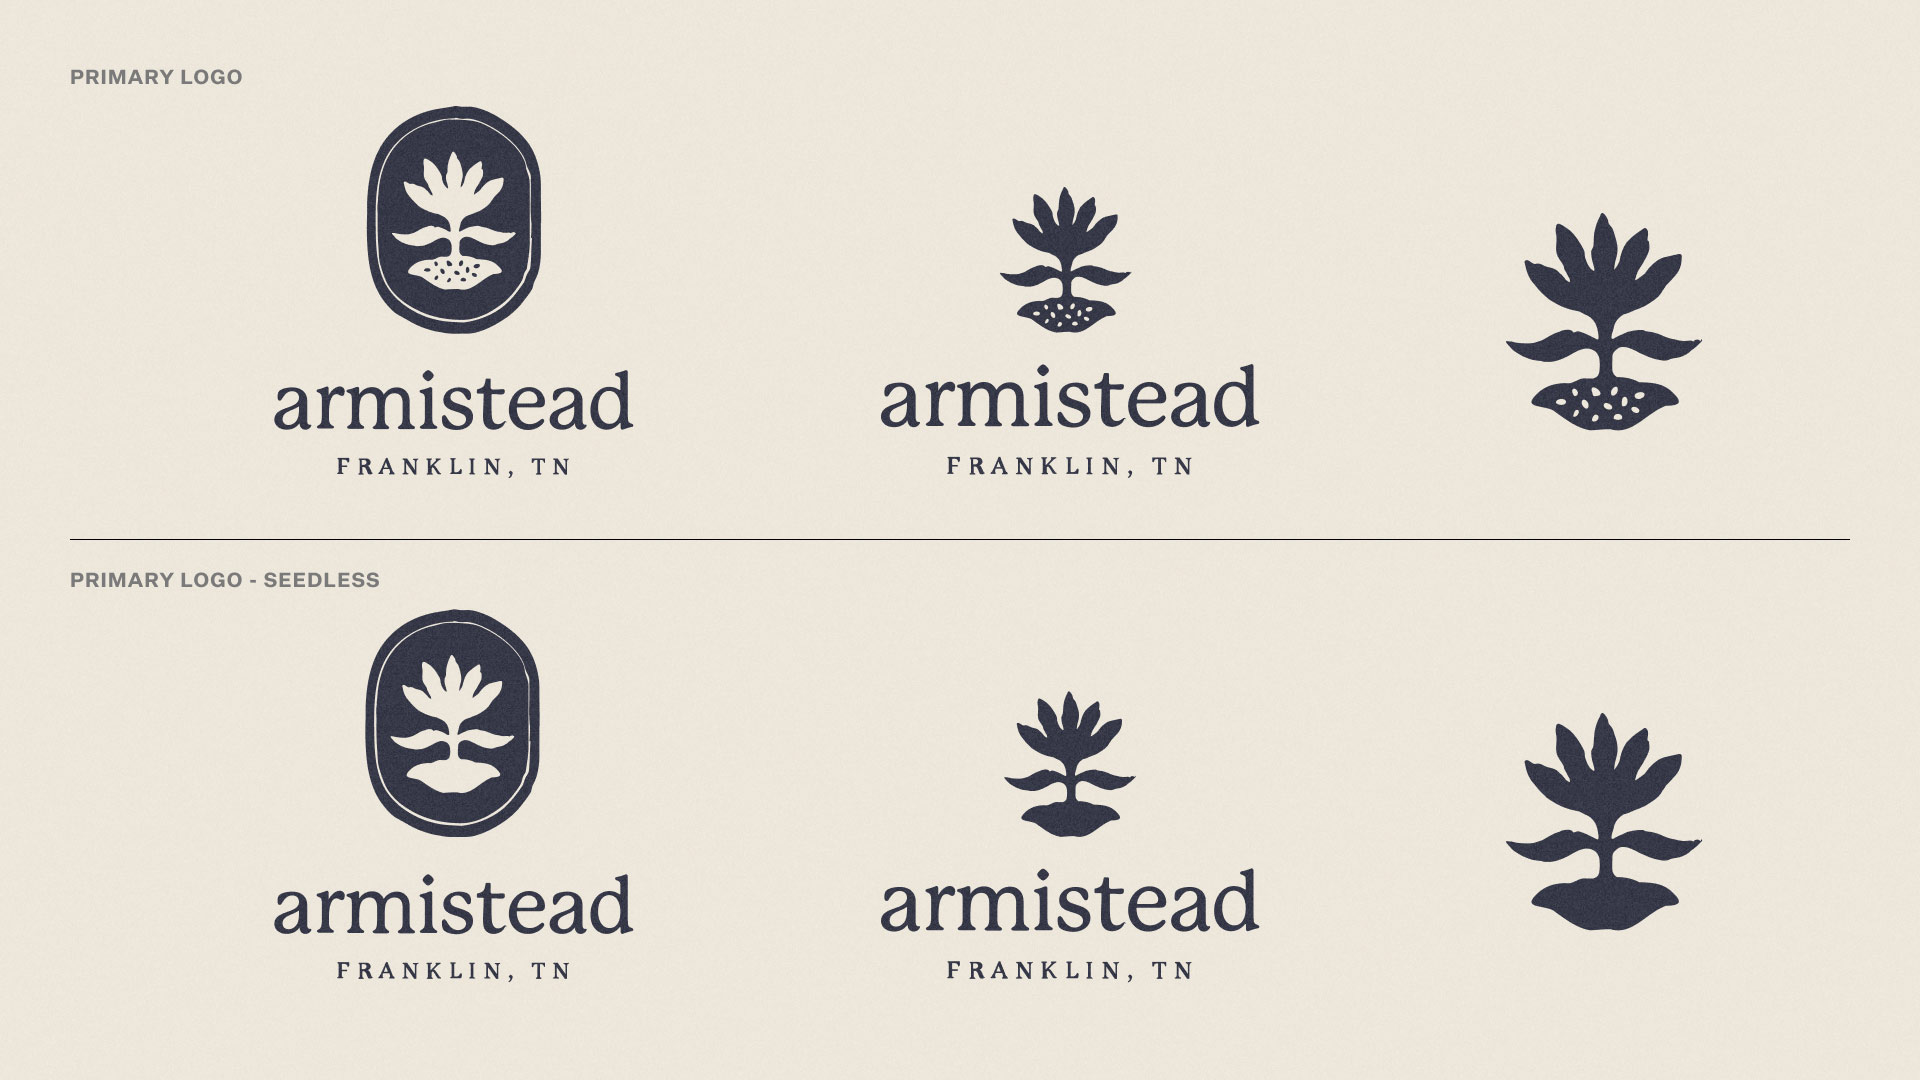 Armistead logo identities showing variations of the logo and logo icon